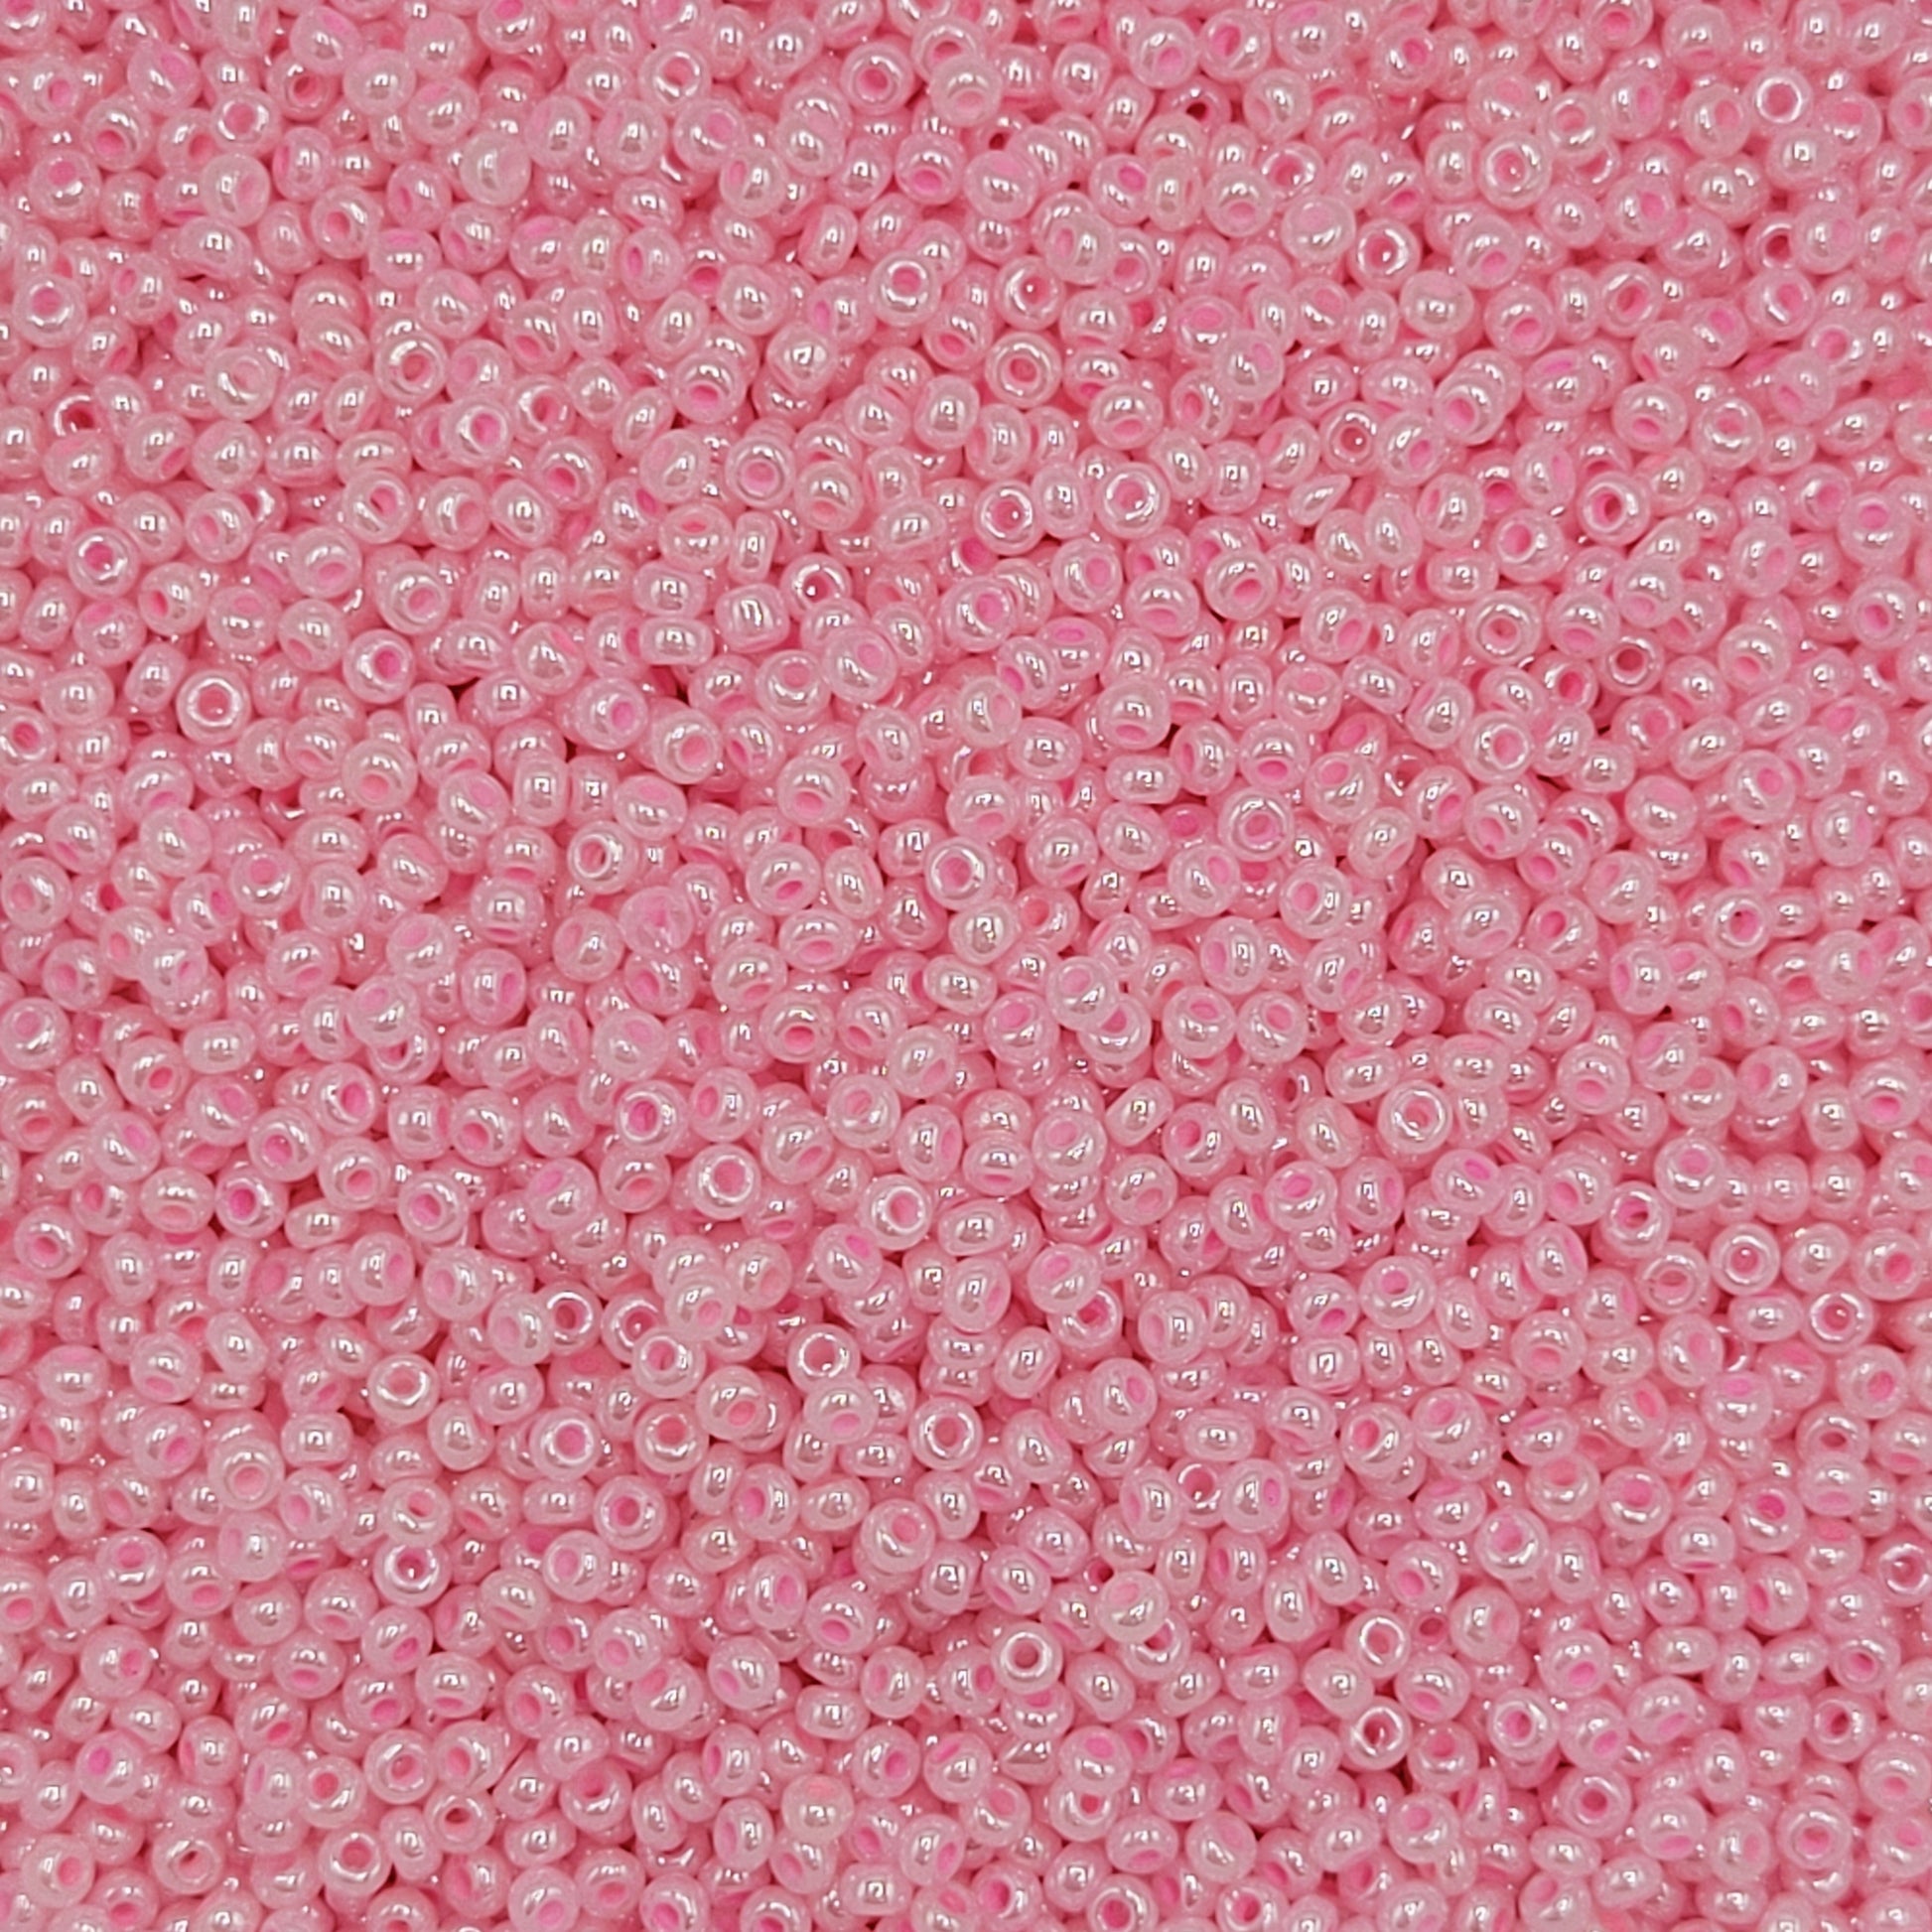 Beads - Vibrant - Baby Pink